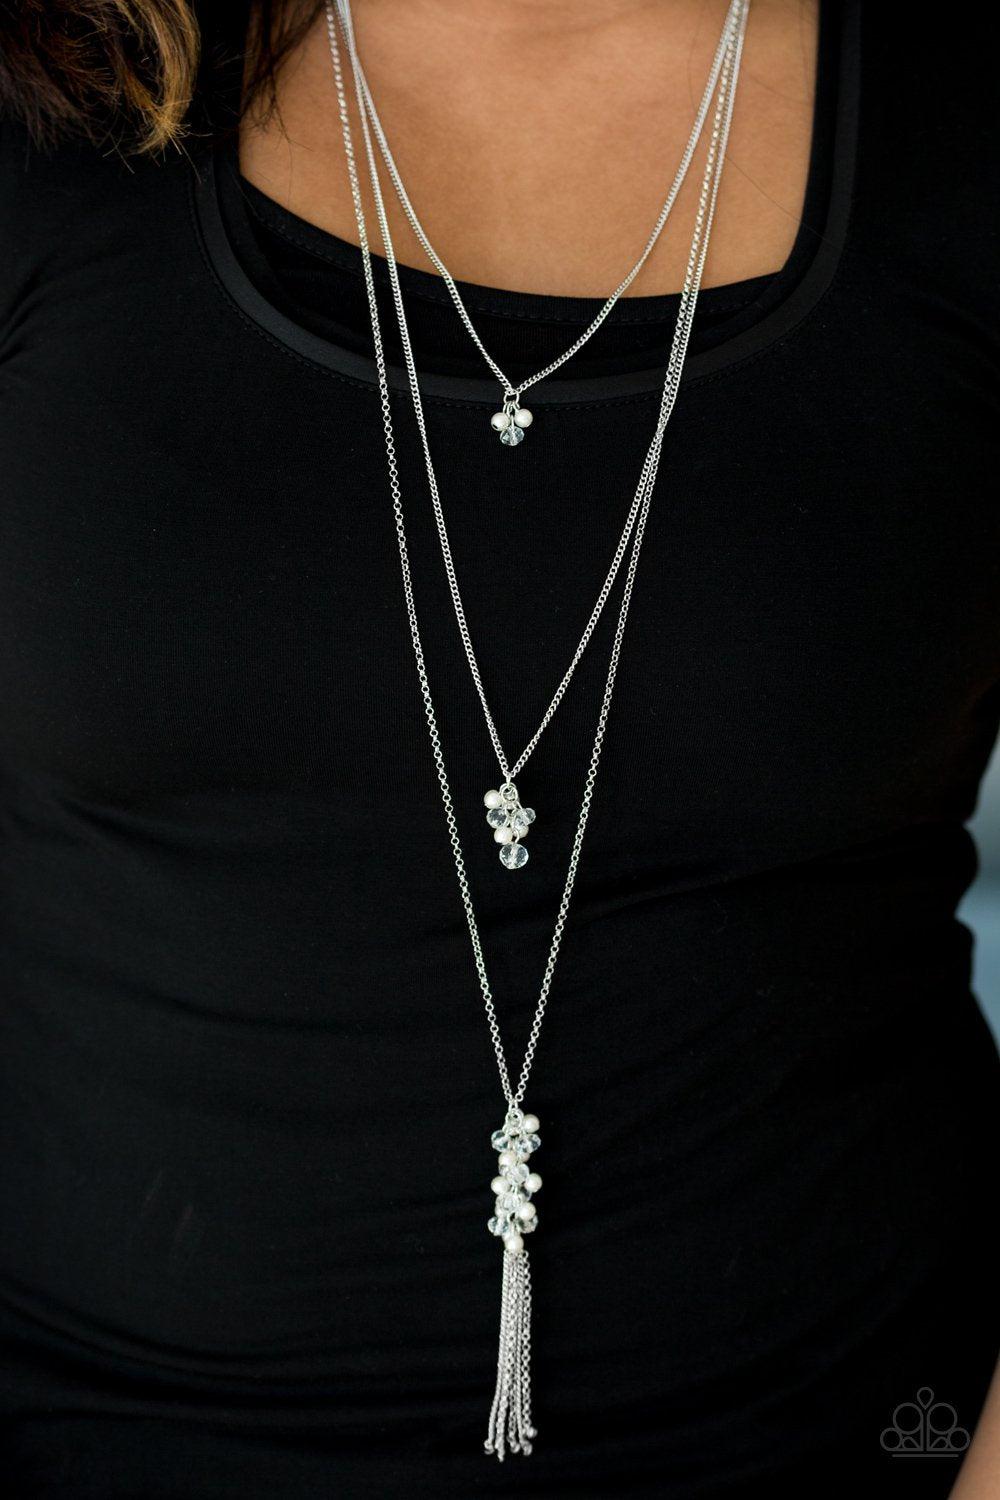 Crystal Cruiser Long Silver and White Tassel Necklace - Paparazzi Accessories-CarasShop.com - $5 Jewelry by Cara Jewels